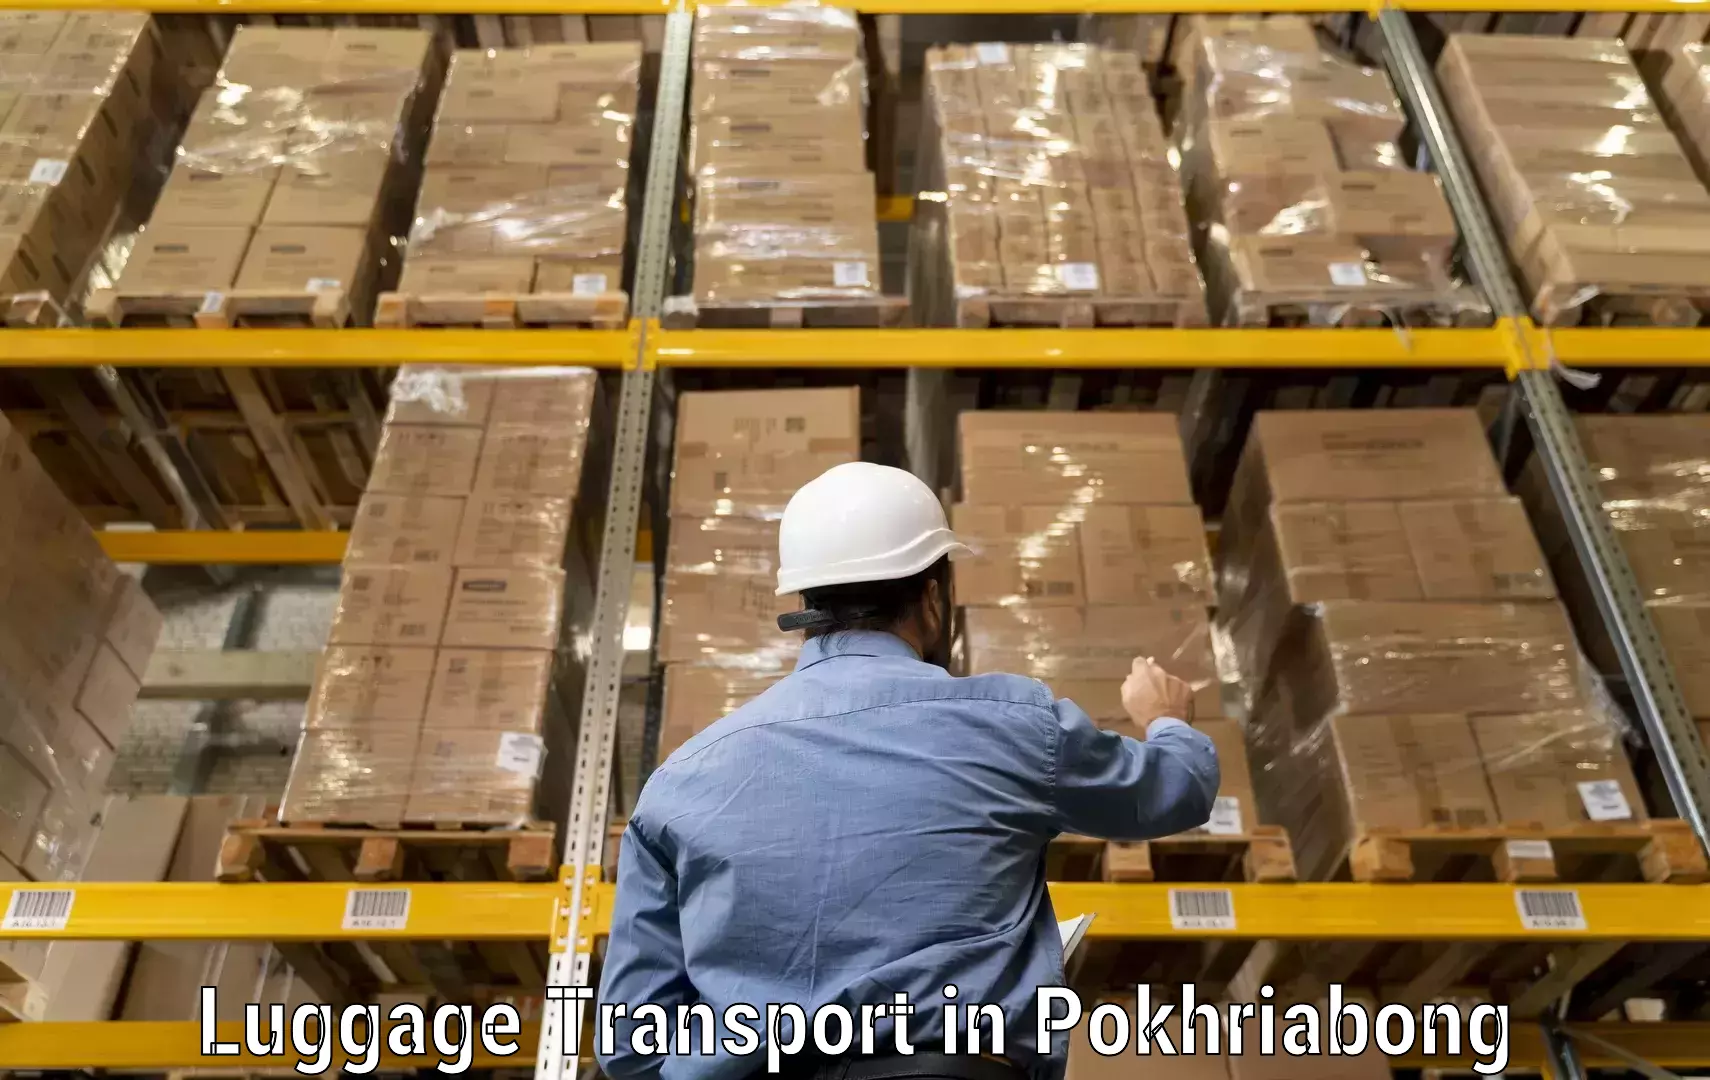 Luggage transport consulting in Pokhriabong